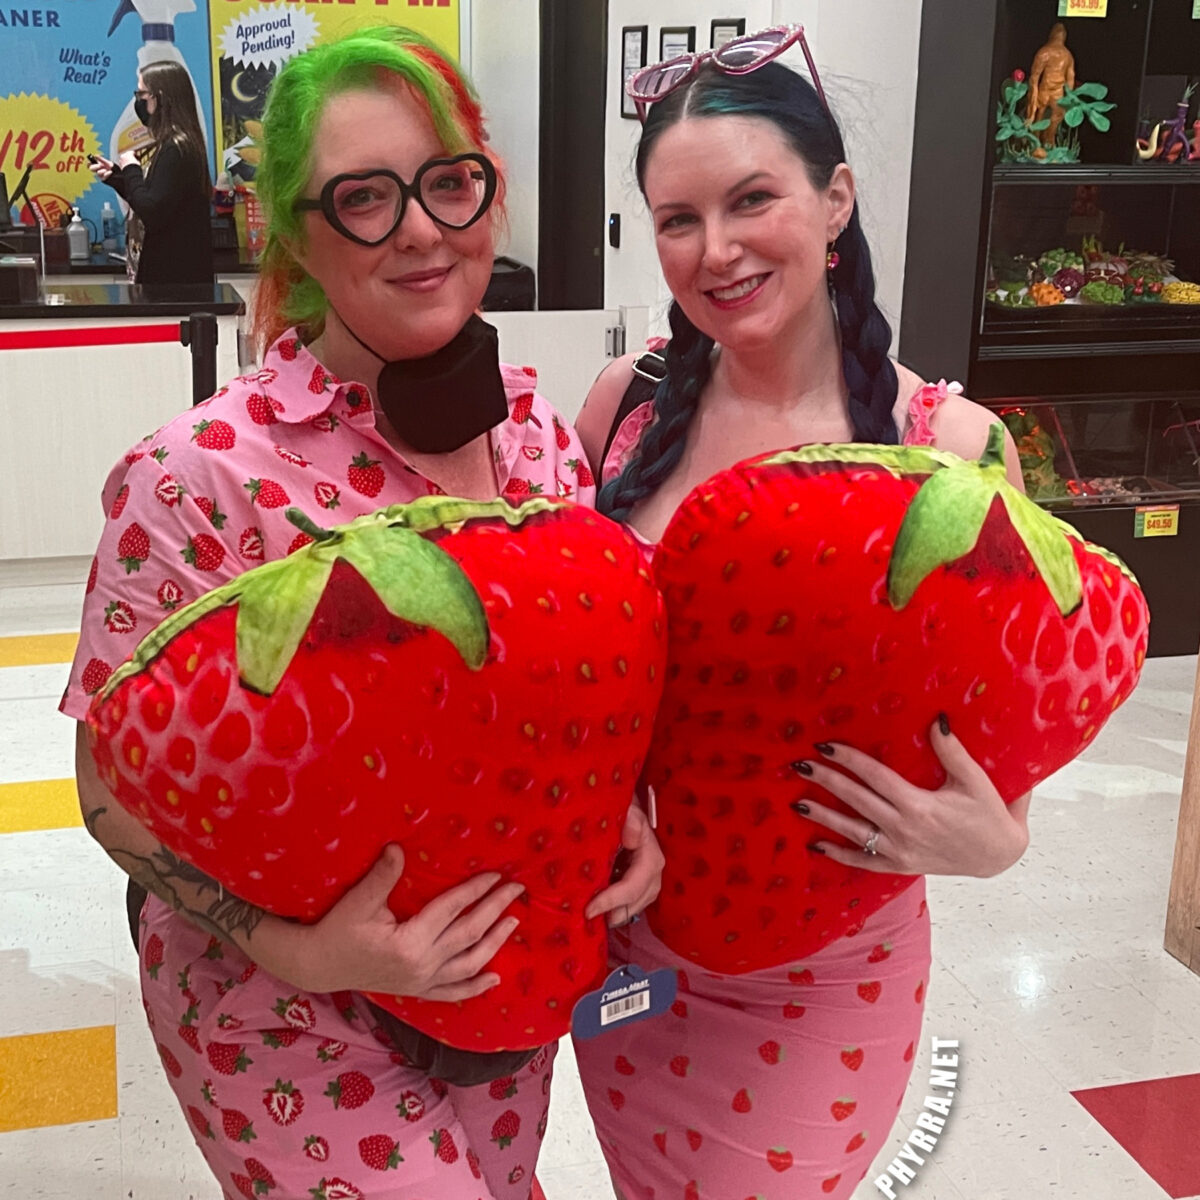 Strawberry Pillows in Omega Mart